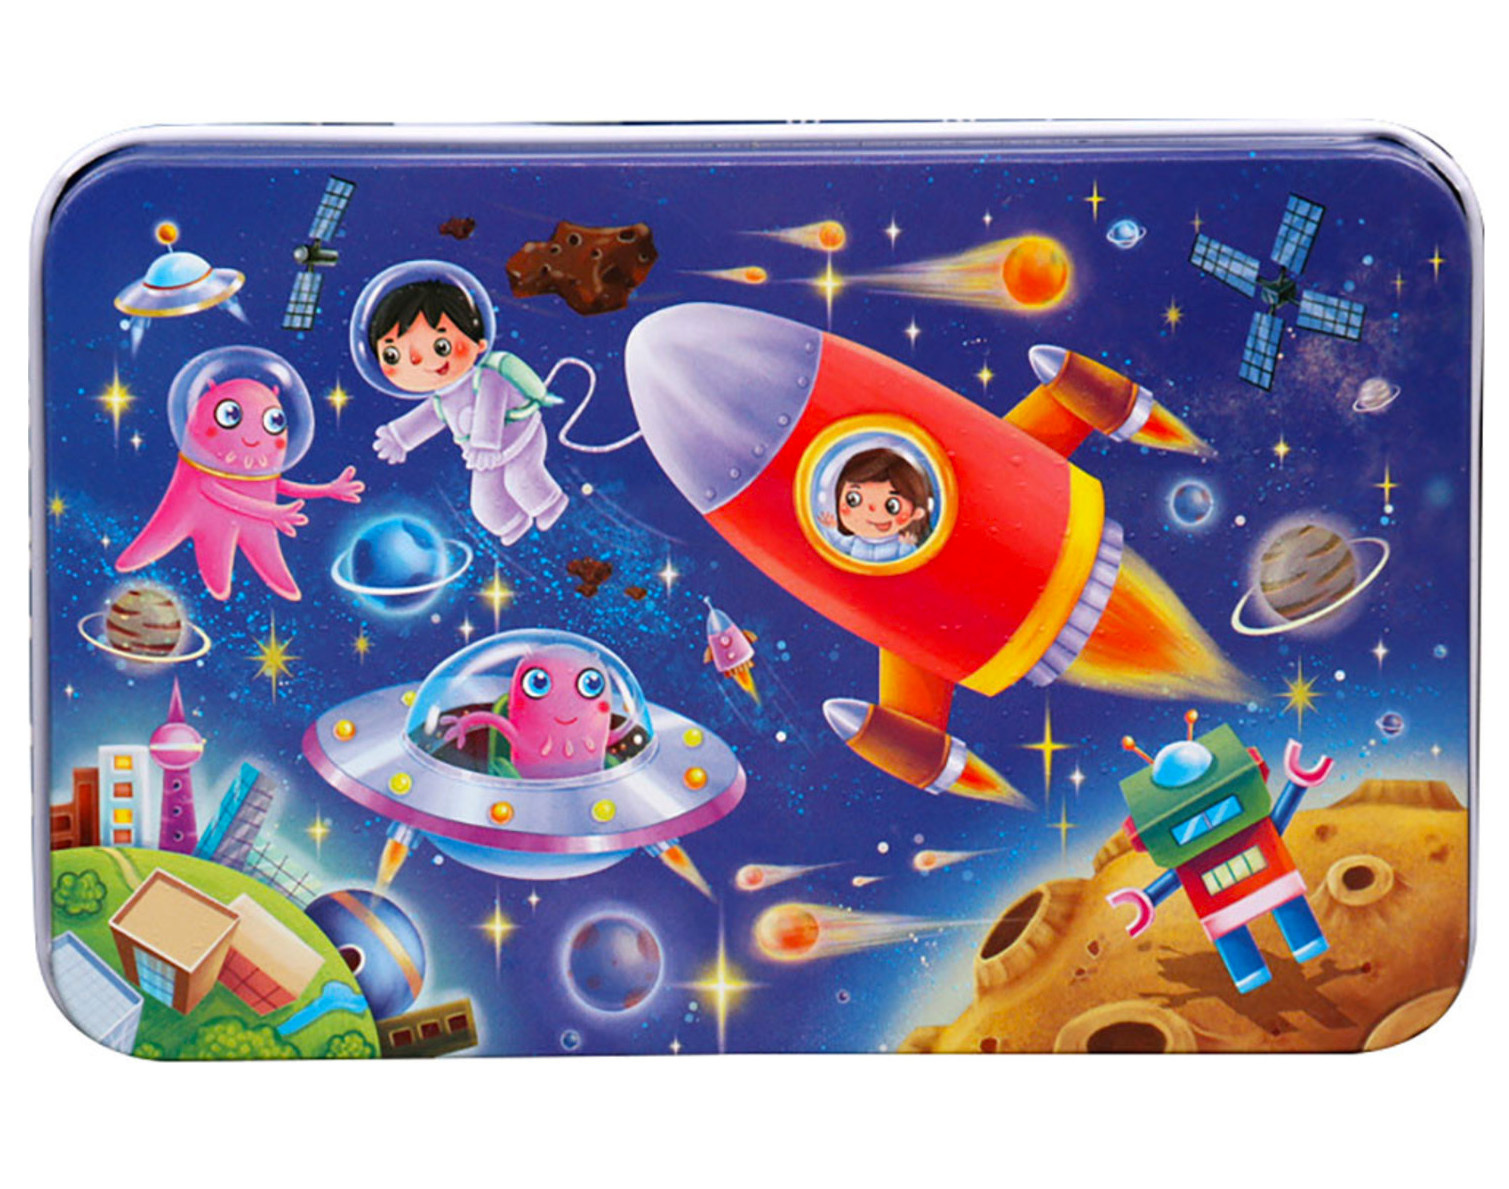 60PCS Wooden Jigsaw Puzzle Kids Educational Toy (Space Adventure)